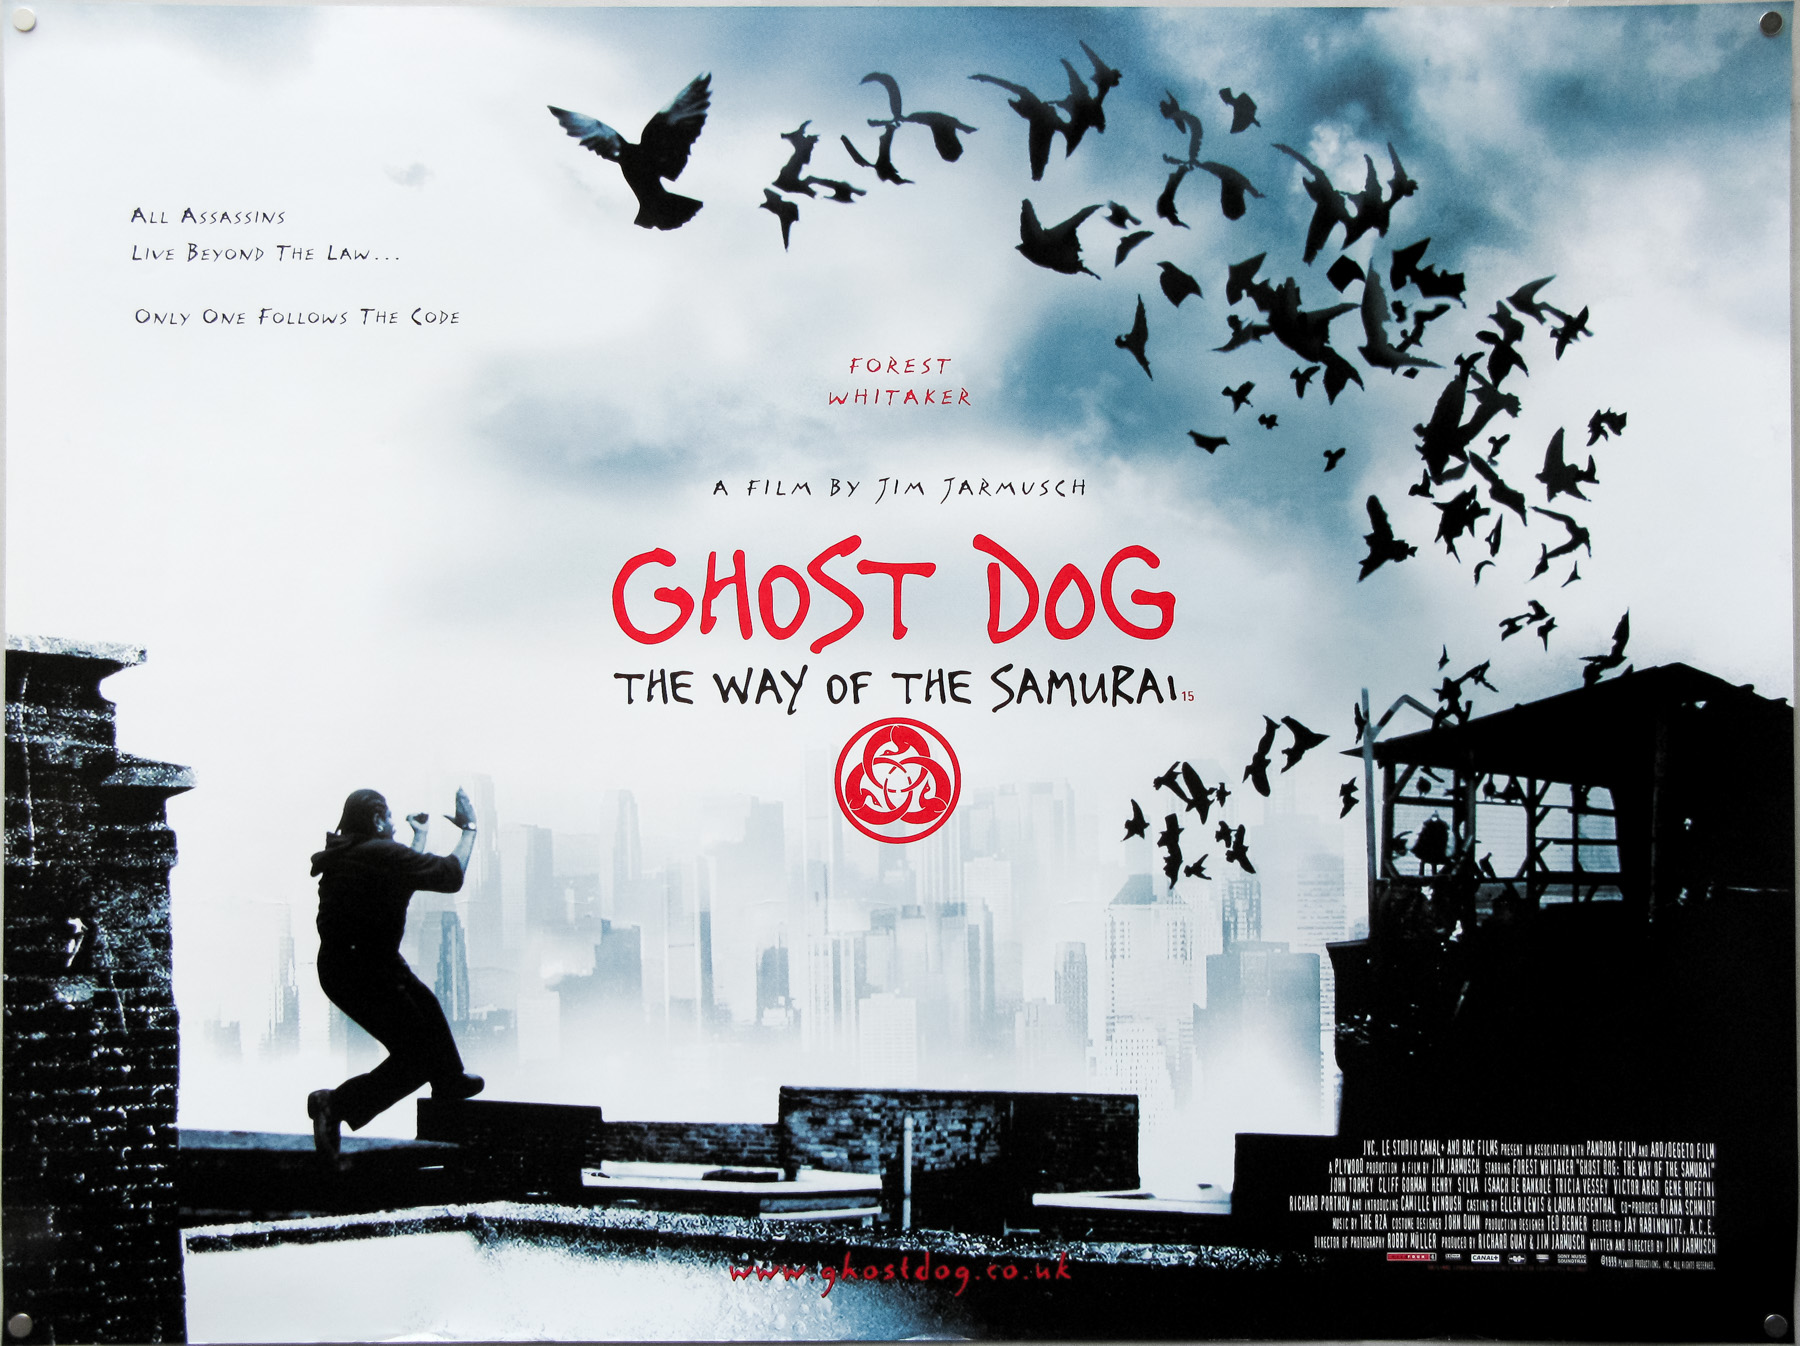 A movie poster for Ghost Dog: The Way of the Samurai